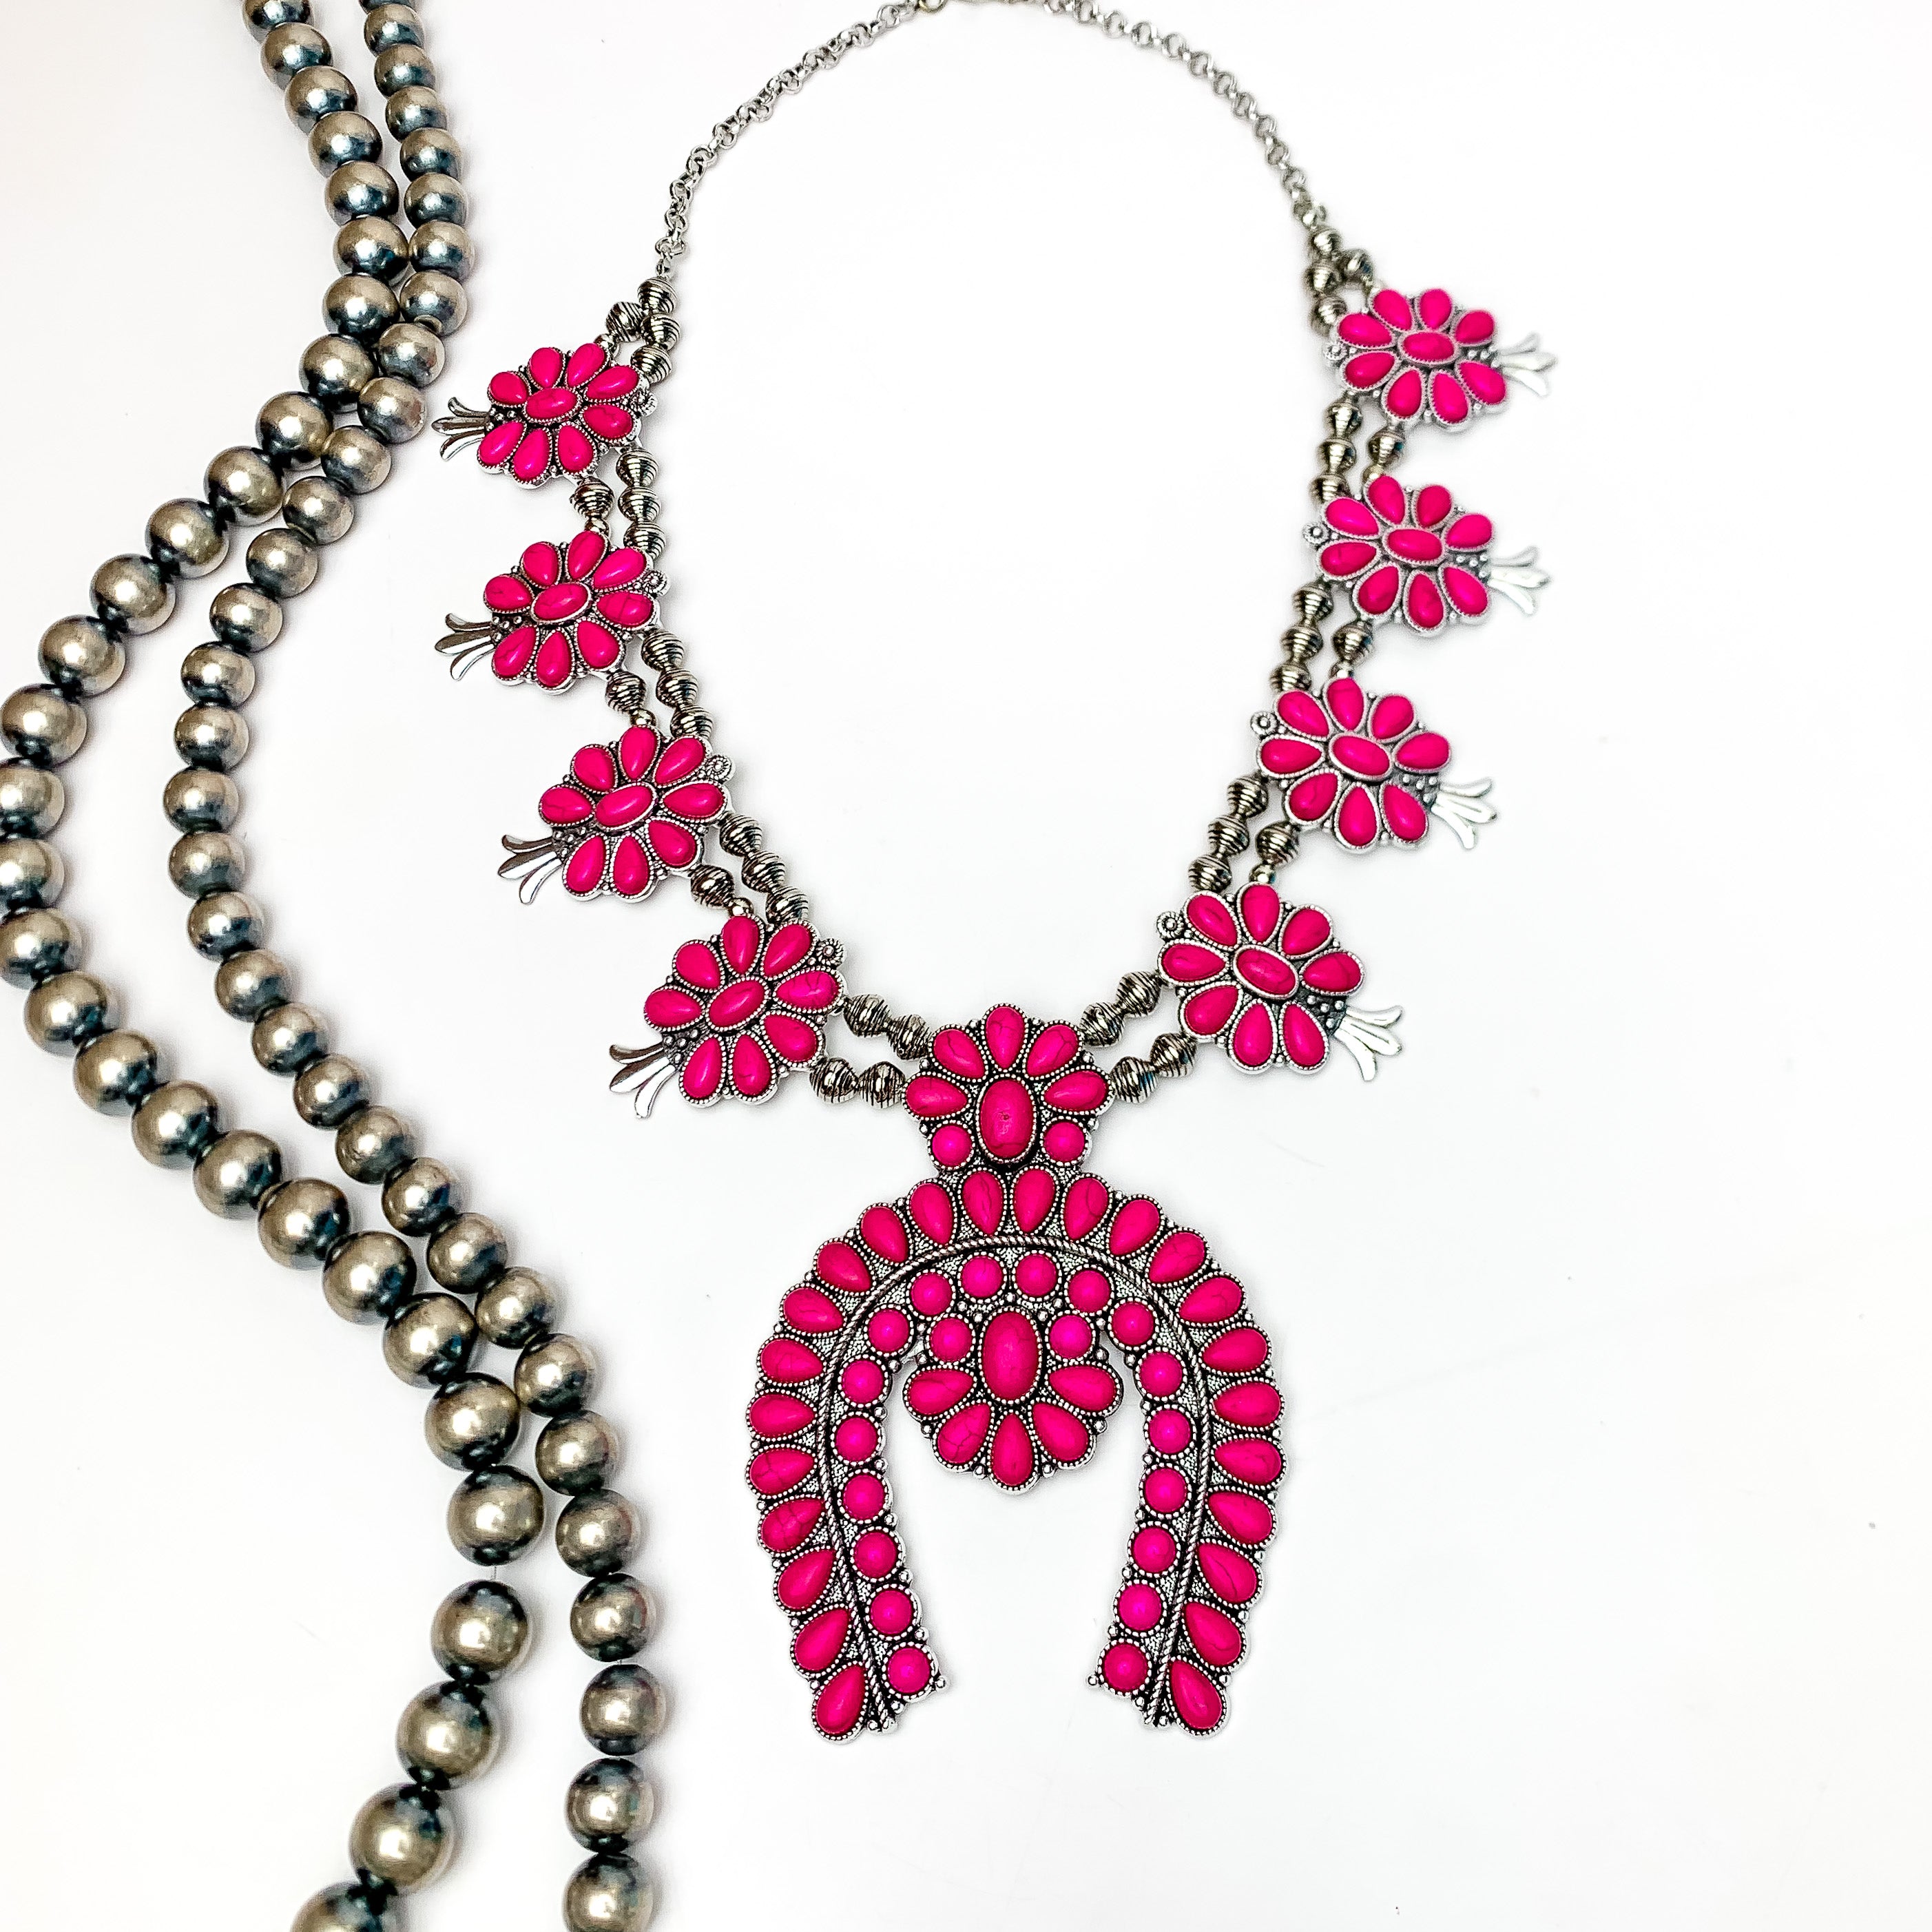 Western Women Squash Blossom Necklace in Hot Pink. Pictured on a white background with Navajo beads on the left.